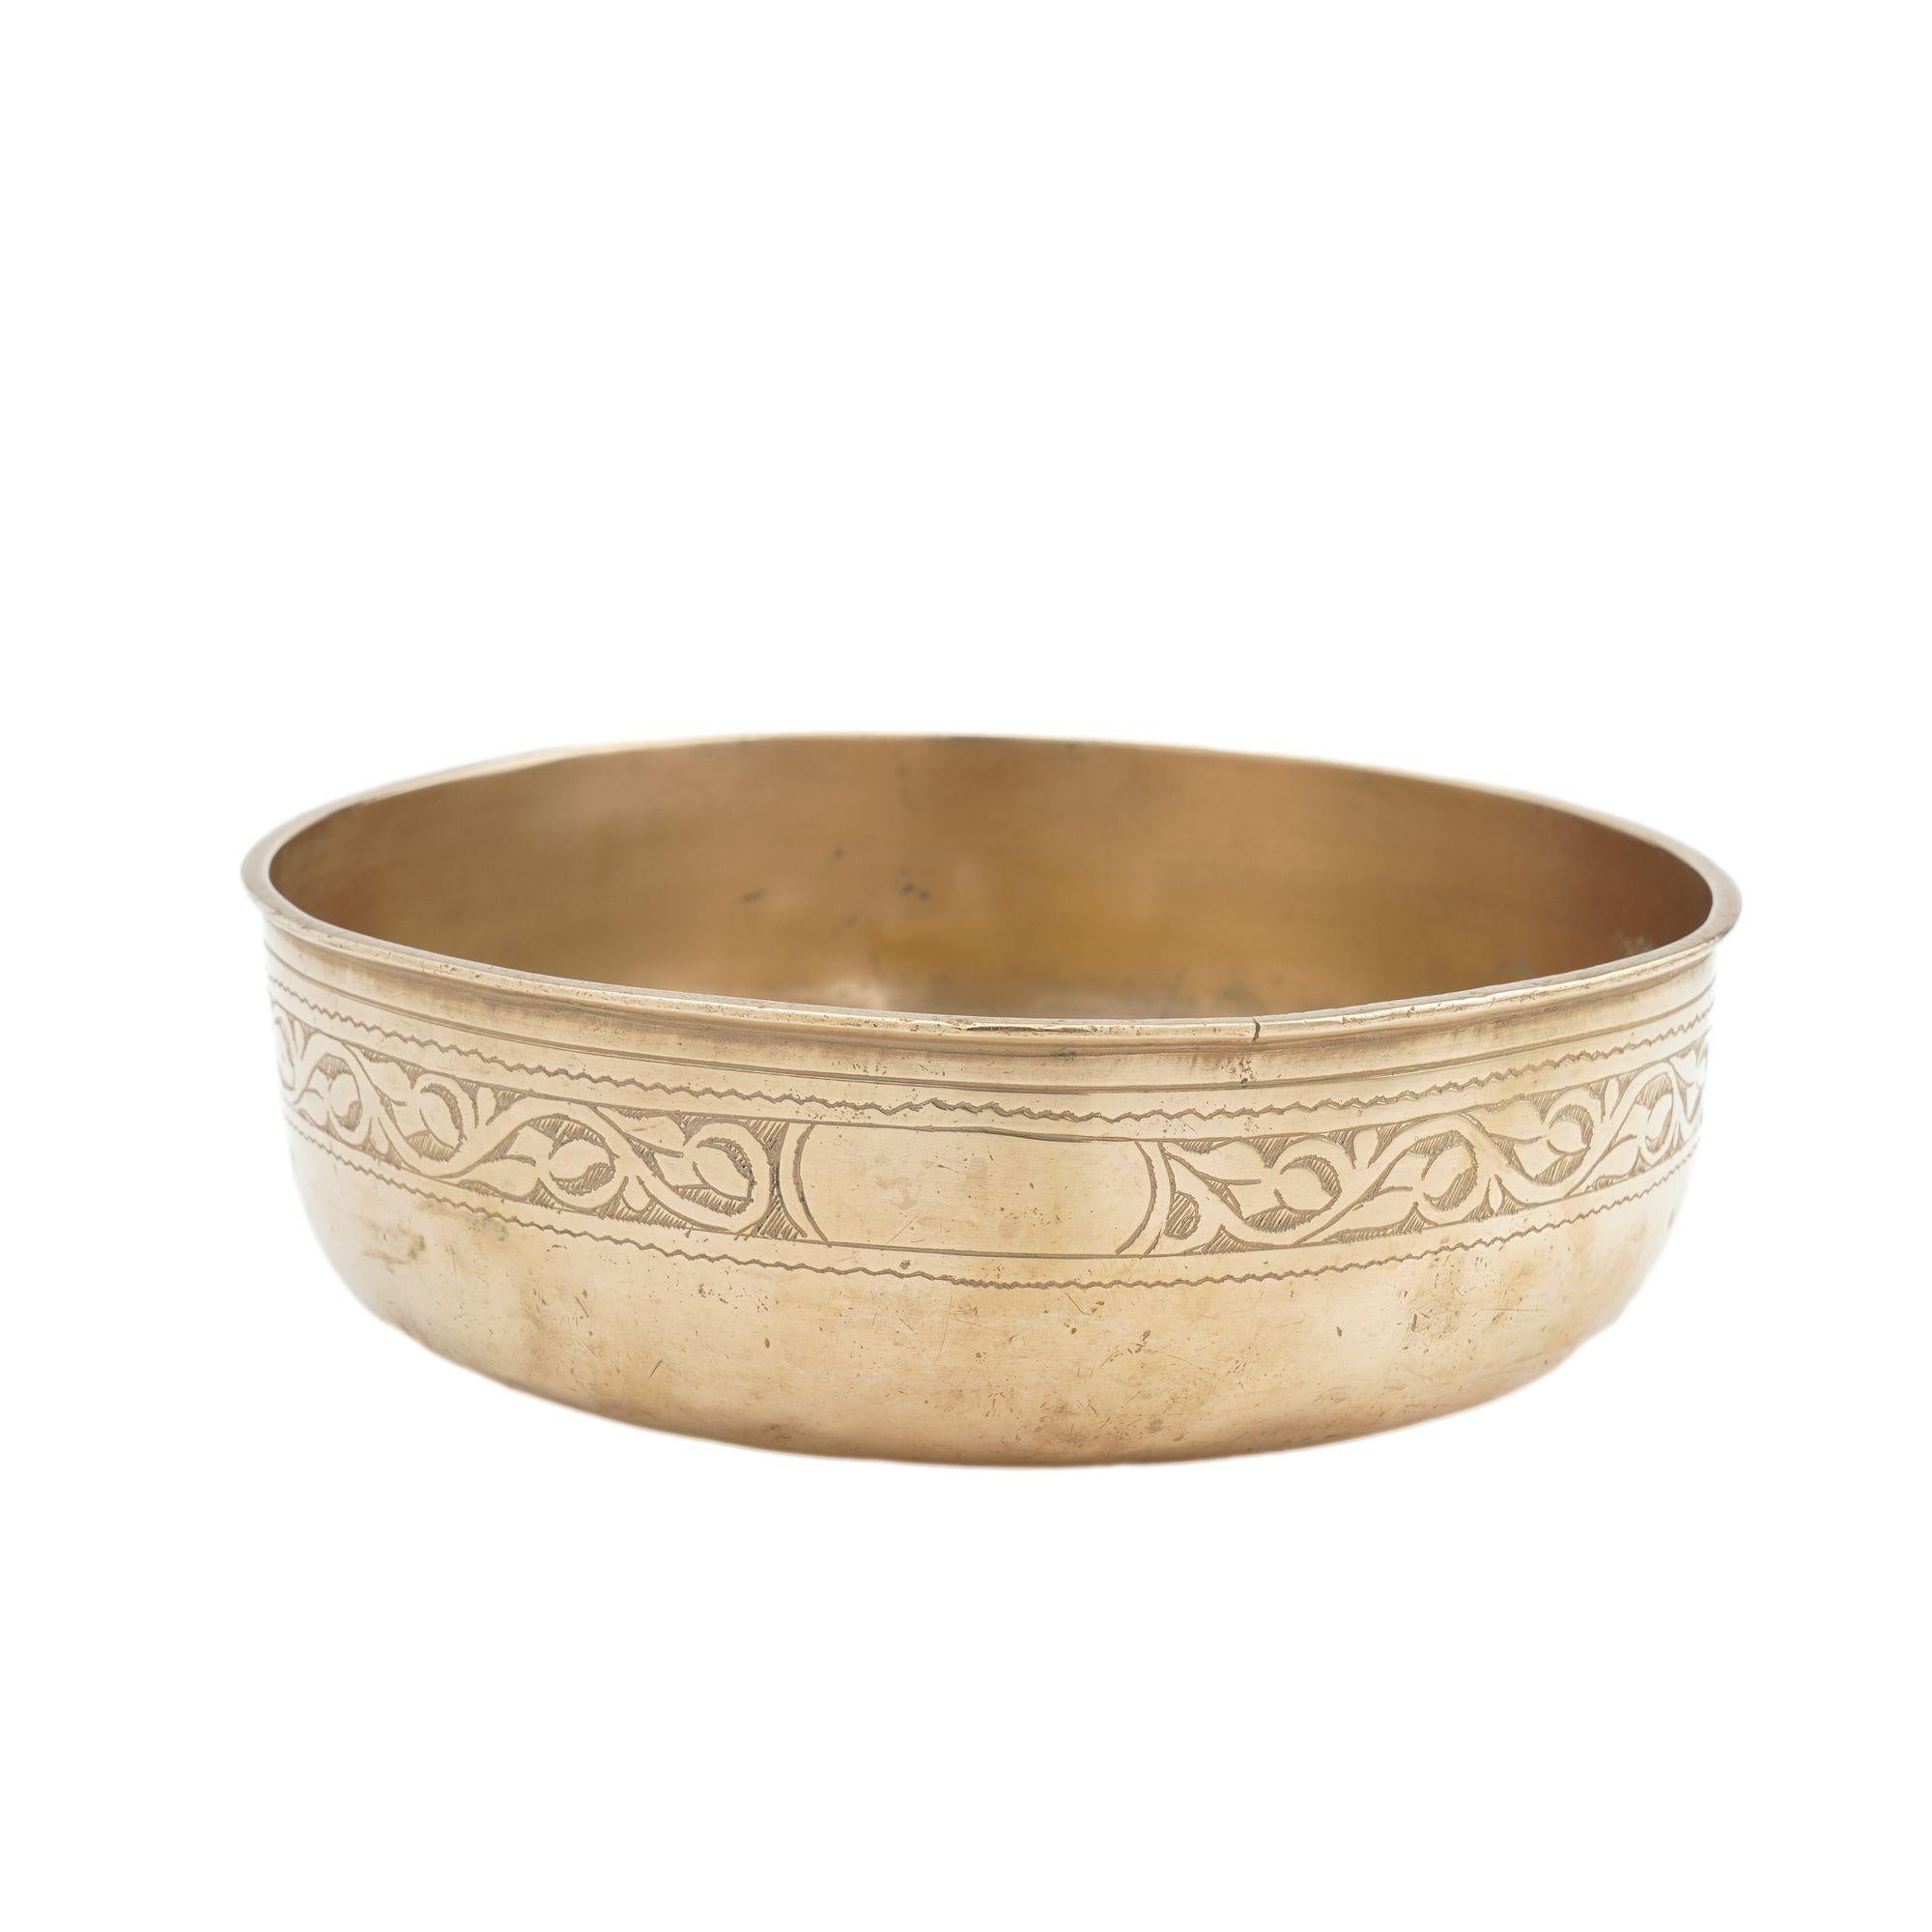 Cast and lathe turned bronze basin. The vertical sides have a beaded rim over an engraved floral band, and the single piece casting has a radius form base.

Continental, 19th century.